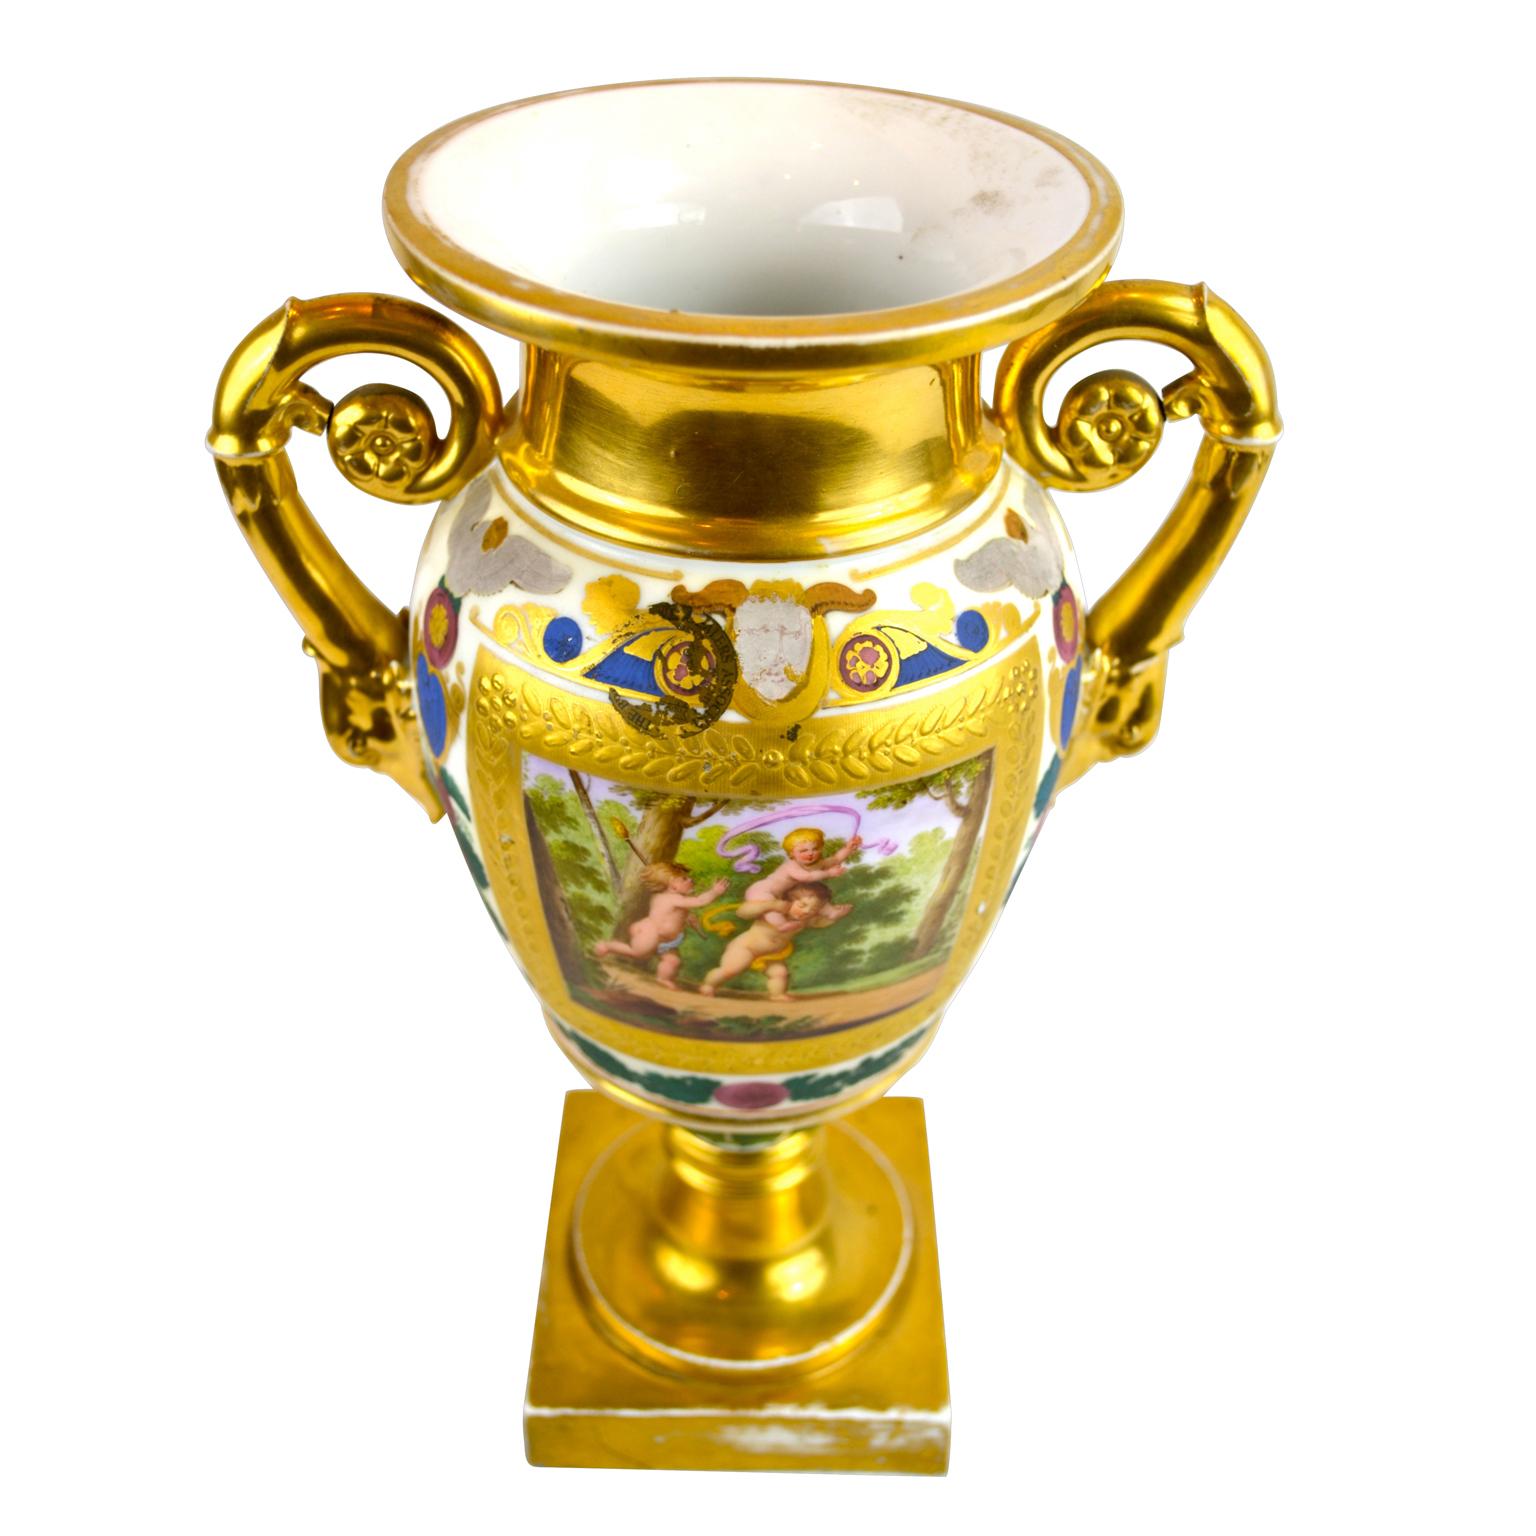 A Paris porcelain urn with swan’s head handles; beautifully painted frolicking cupids to the front, and matte and burnished framed musical motifs to the back. Some rubbing consistent with age.